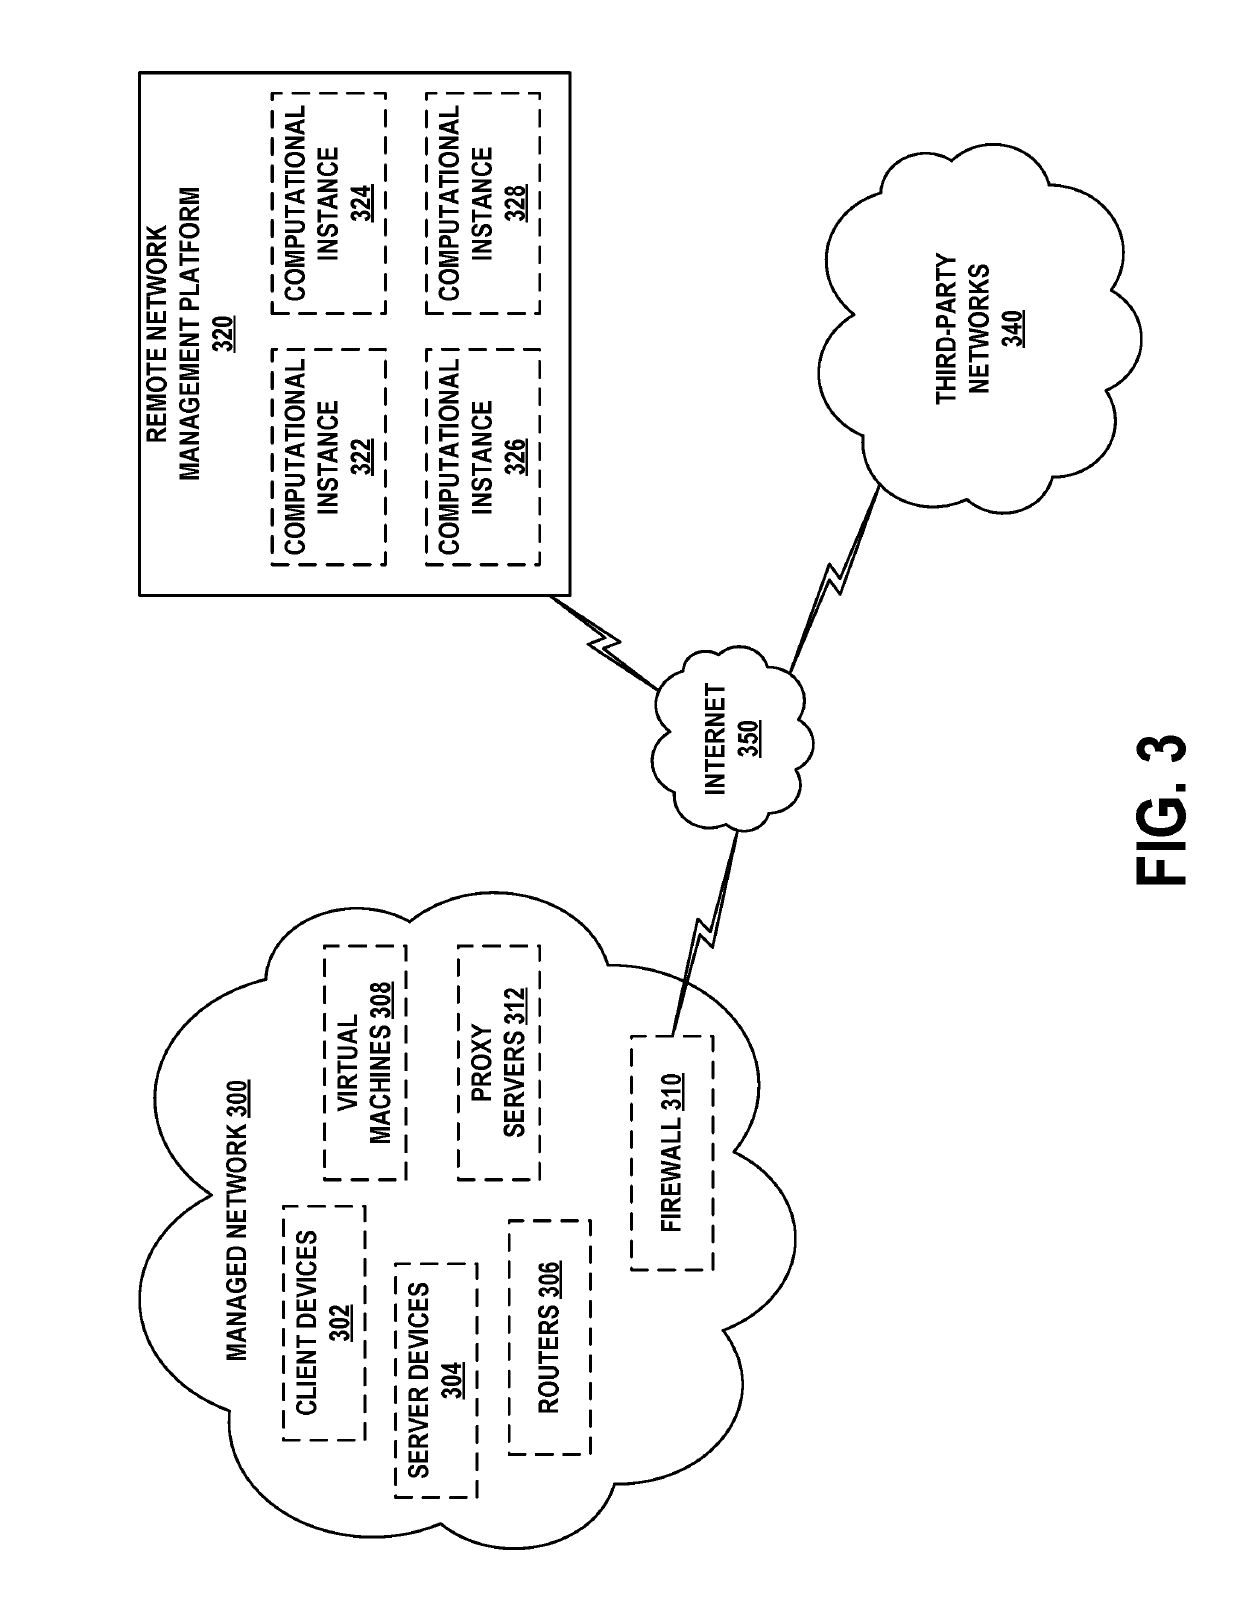 Improvements to operation of device and application discovery for a managed network